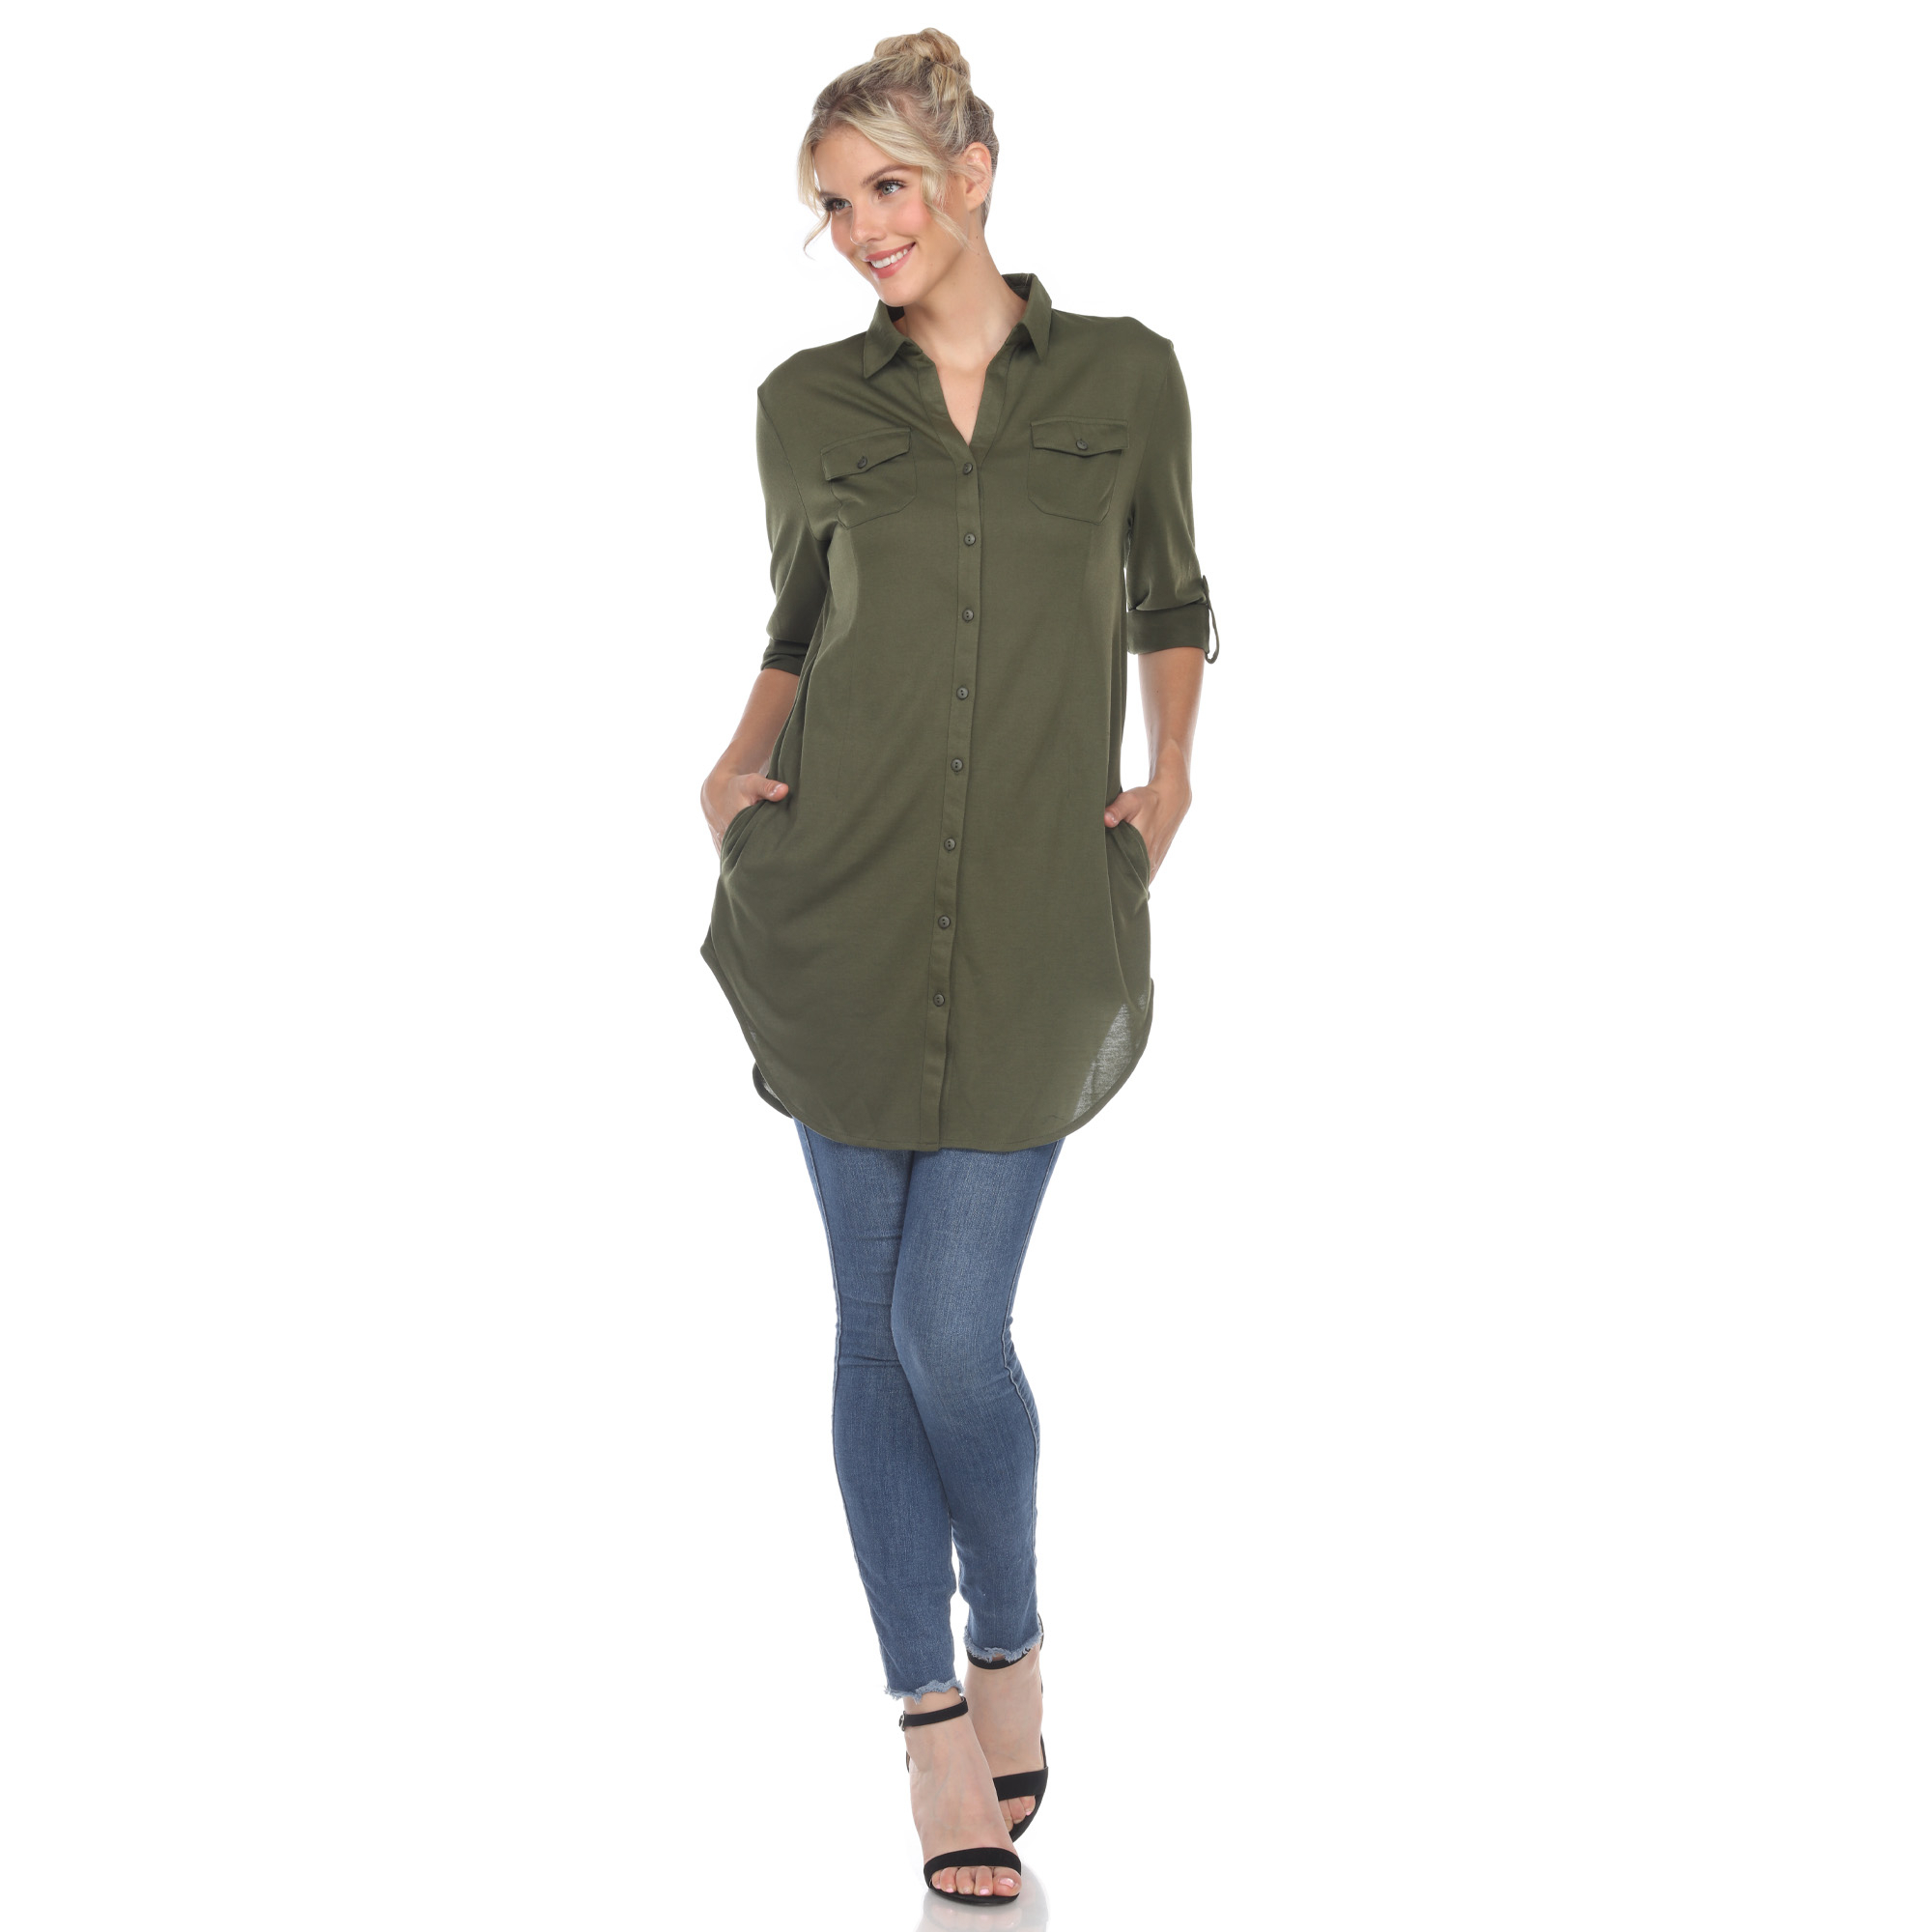 White Mark Women's Stretchy Quarter Sleeve Button Down Tunic Top With Pockets - Olive, Small